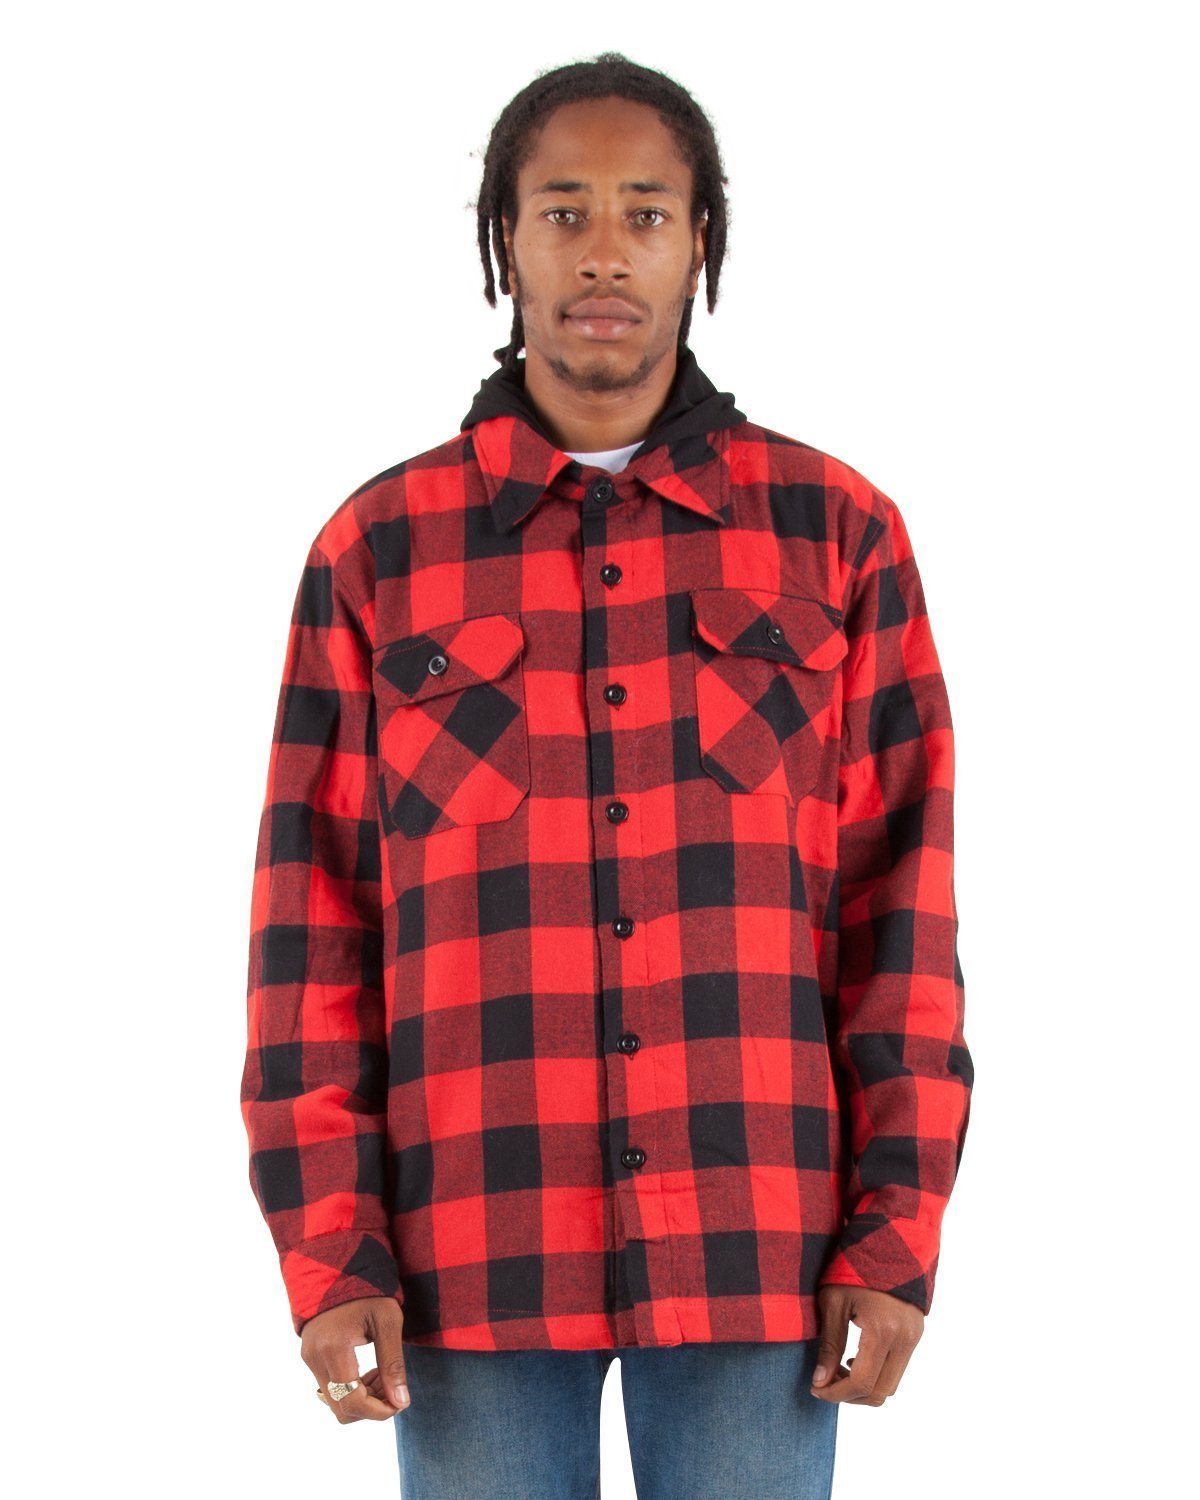 Flannel Jacket XL / Red and Black